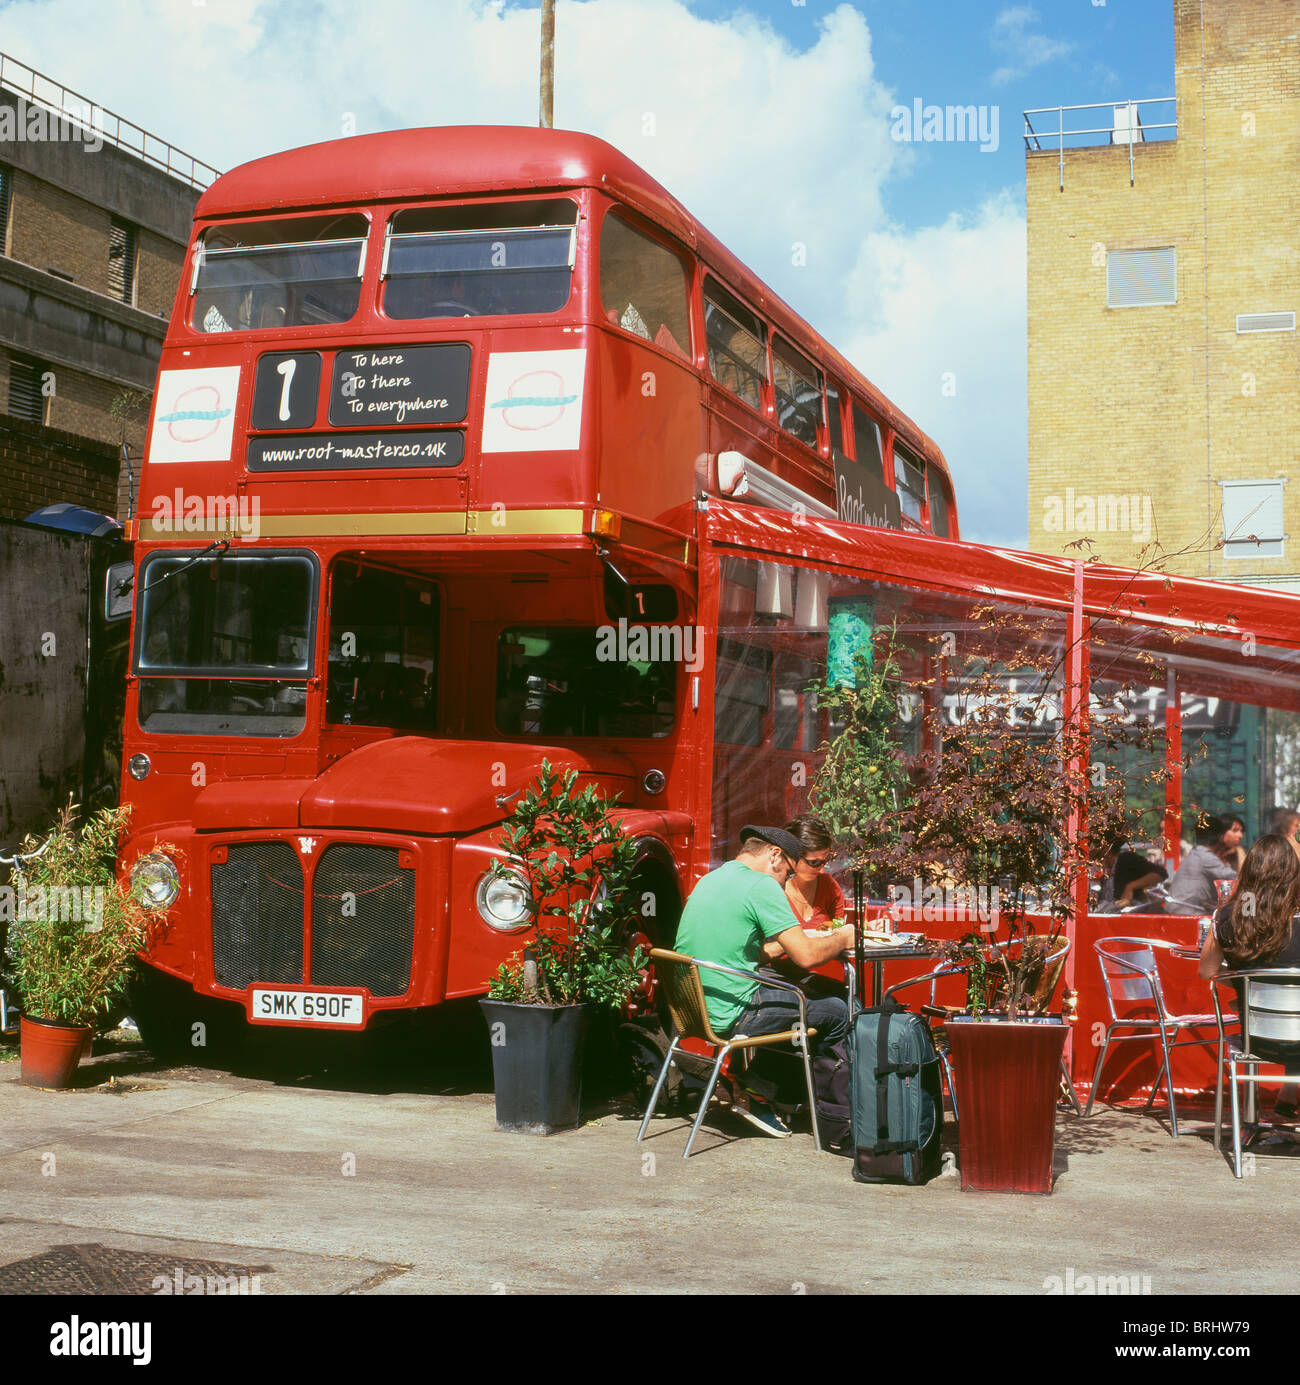 A red double-decker vintage route master bus being used as Rootmaster cafe and restaurant Shoreditch London UK  KATHY DEWITT Stock Photo